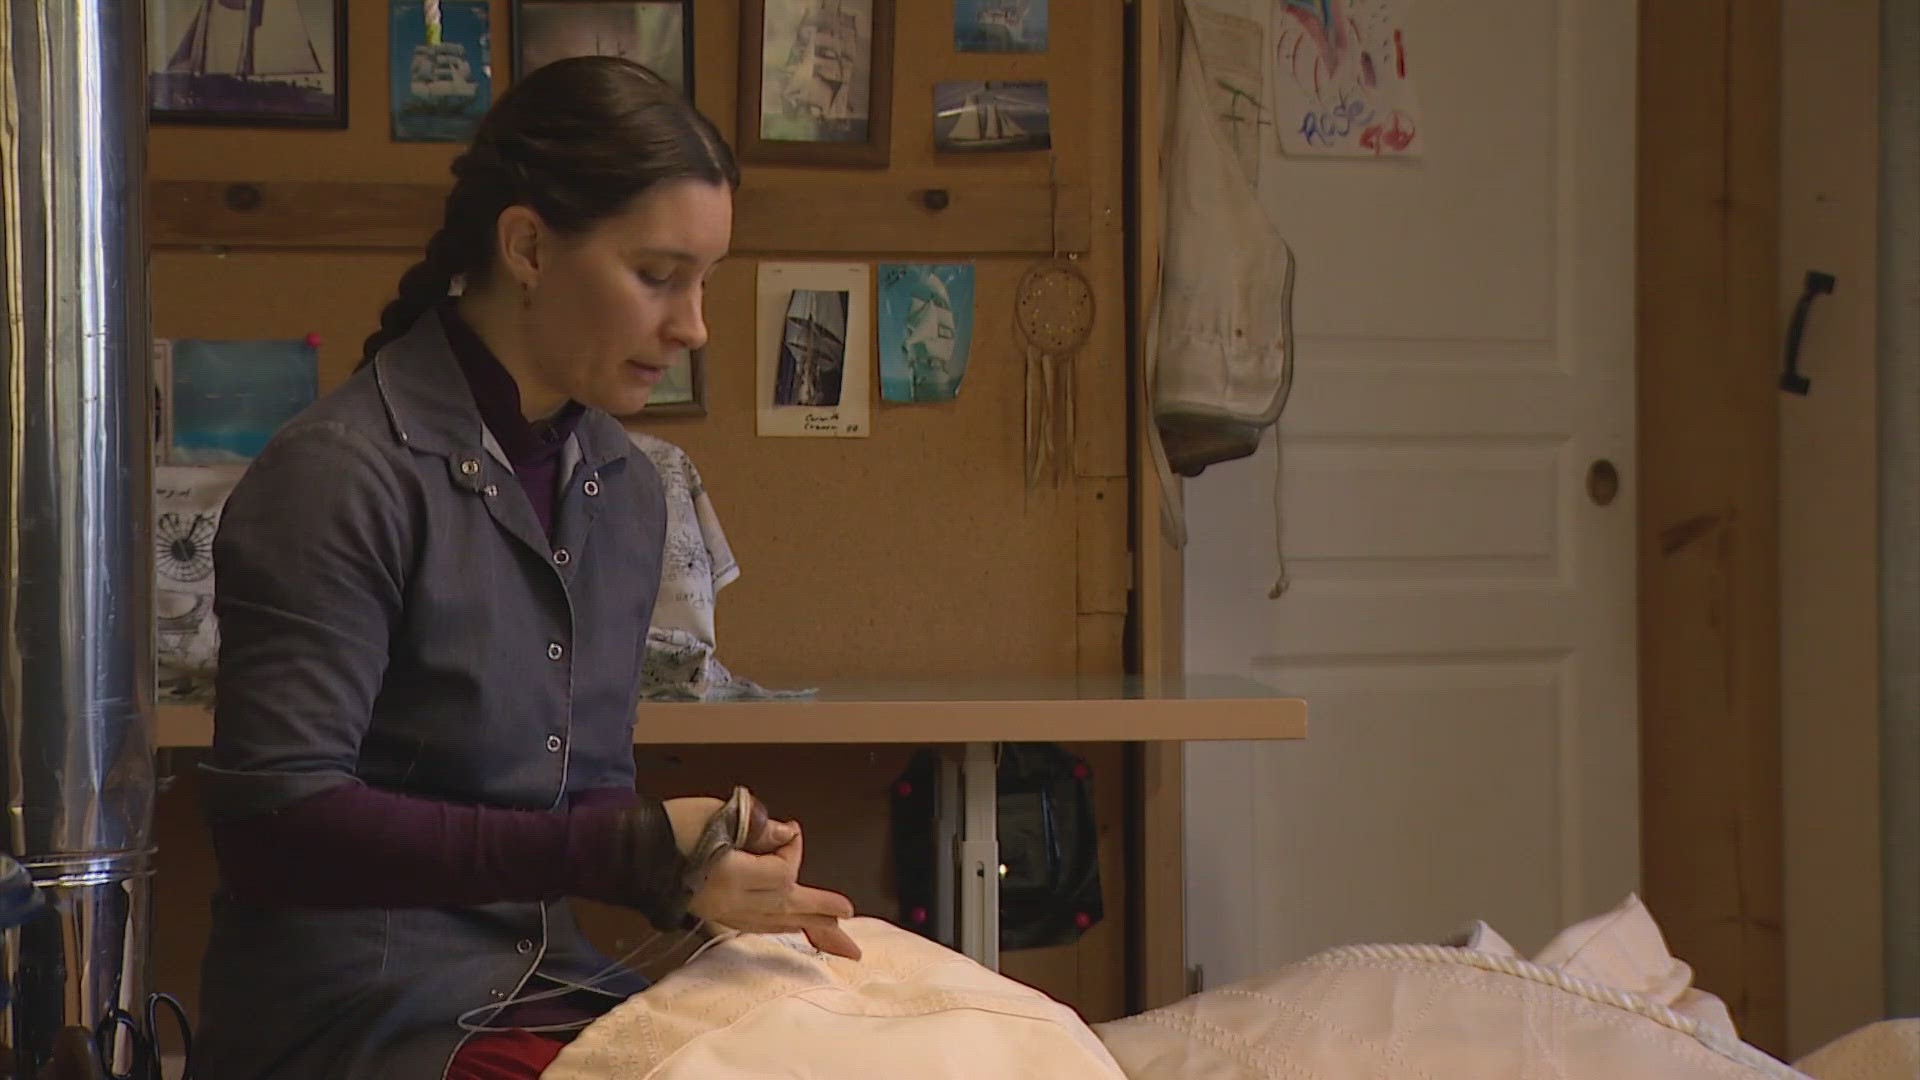 Nahja Chimenti runs her family's business, hand-sewing thousands and thousands of sails that will propel huge ships around the world.